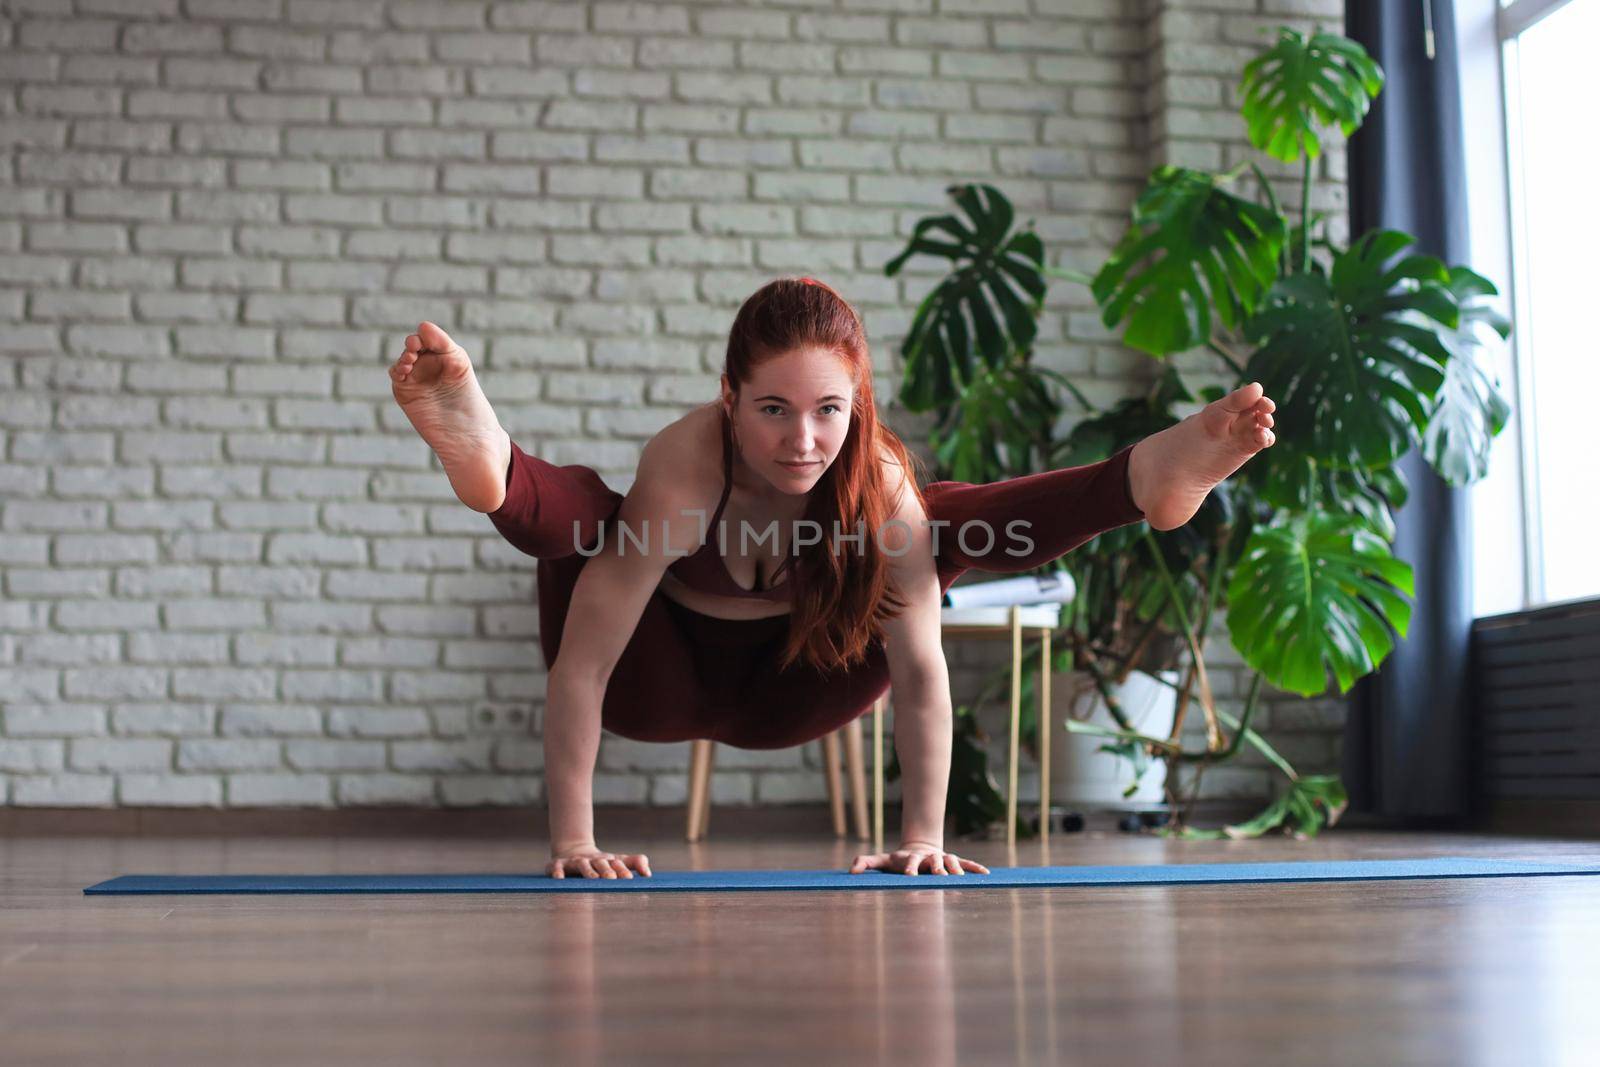 Healthy life. Attractive woman practicing home yoga, working out, wearing sportswear